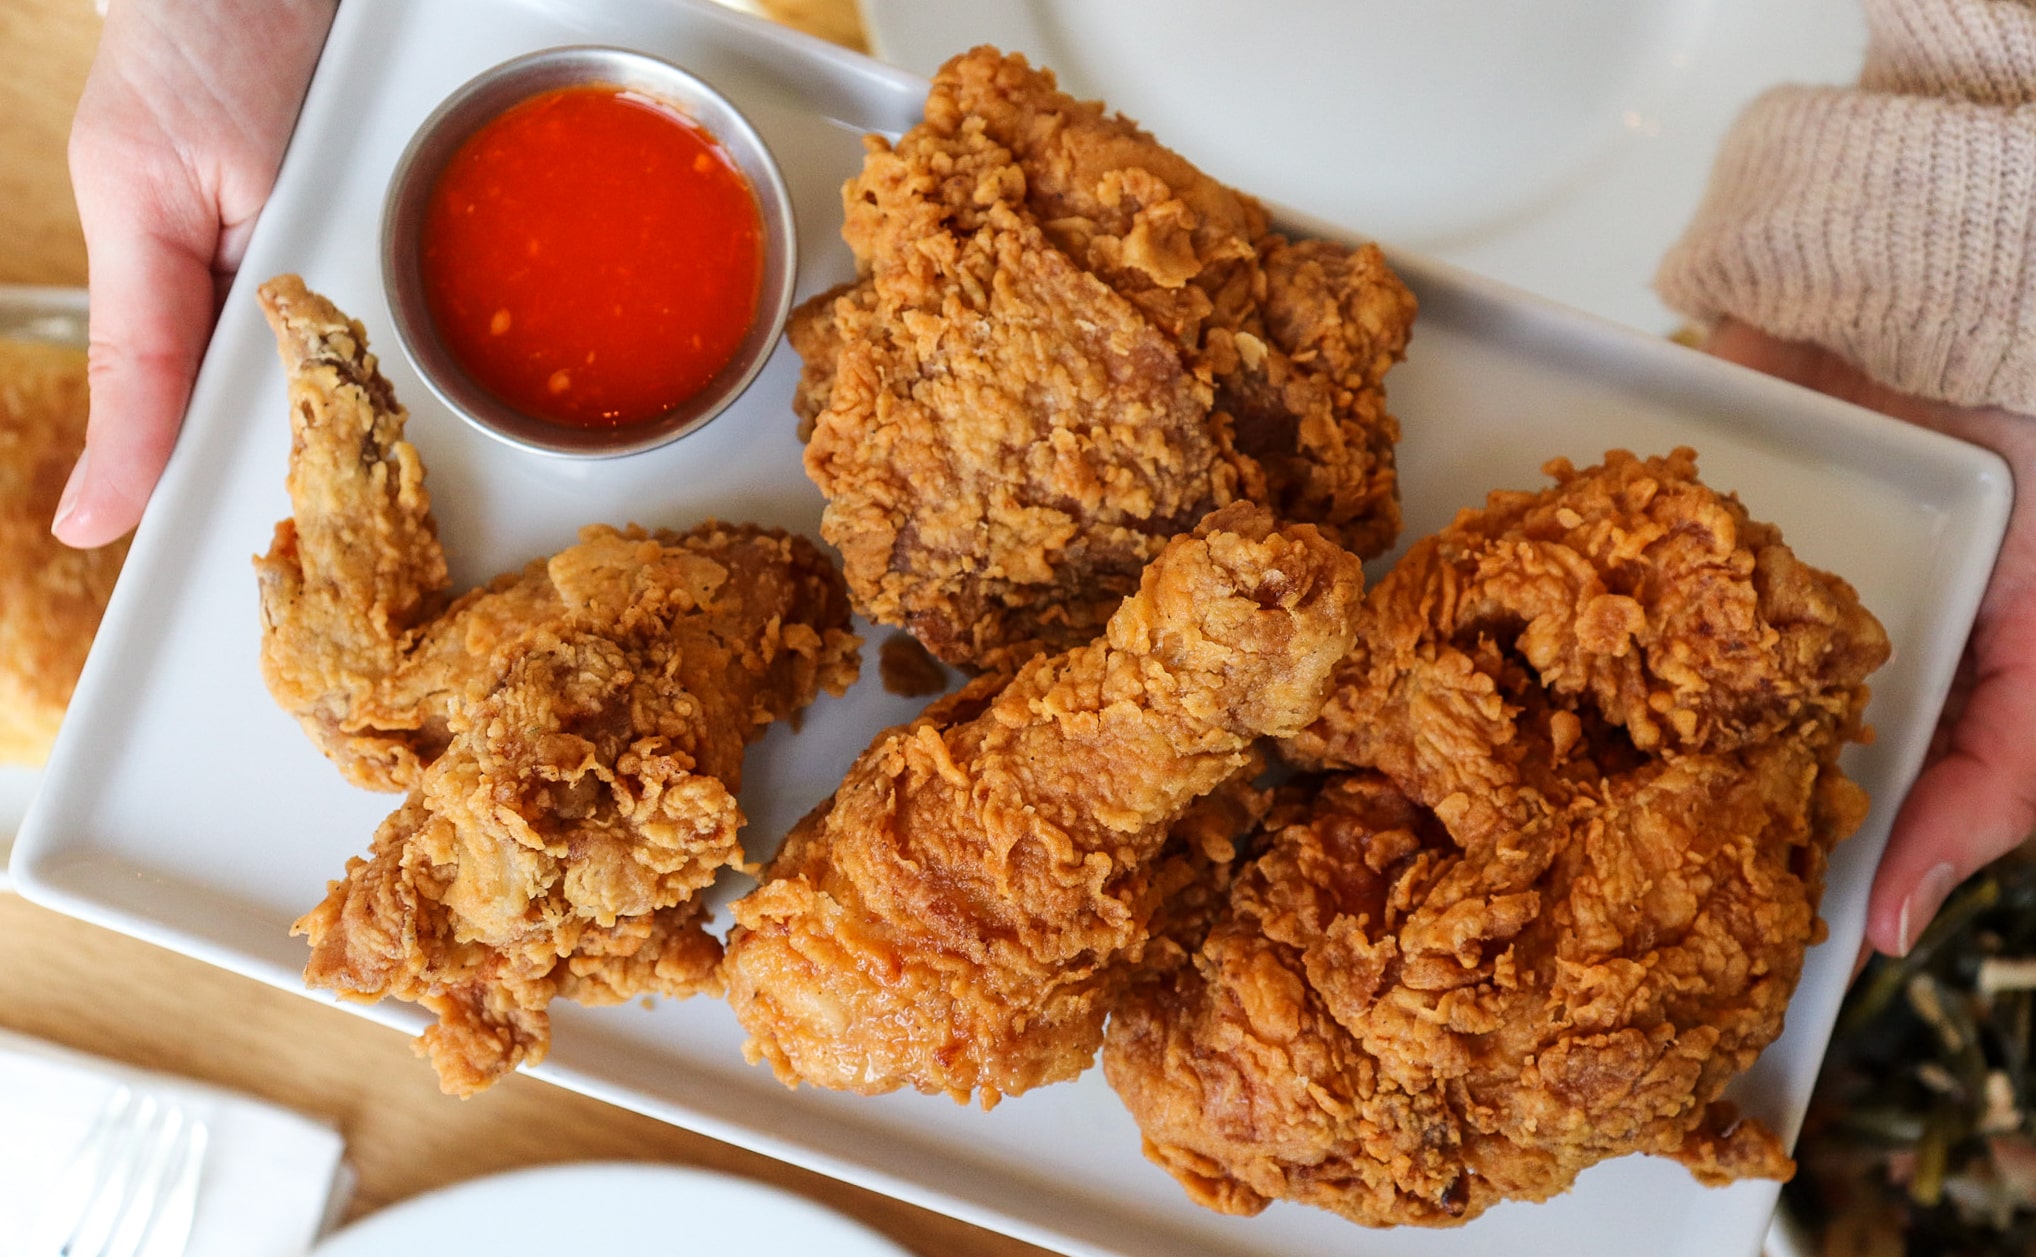 An image of Fried Chicken at Huckleberry Bakery and Cafe.